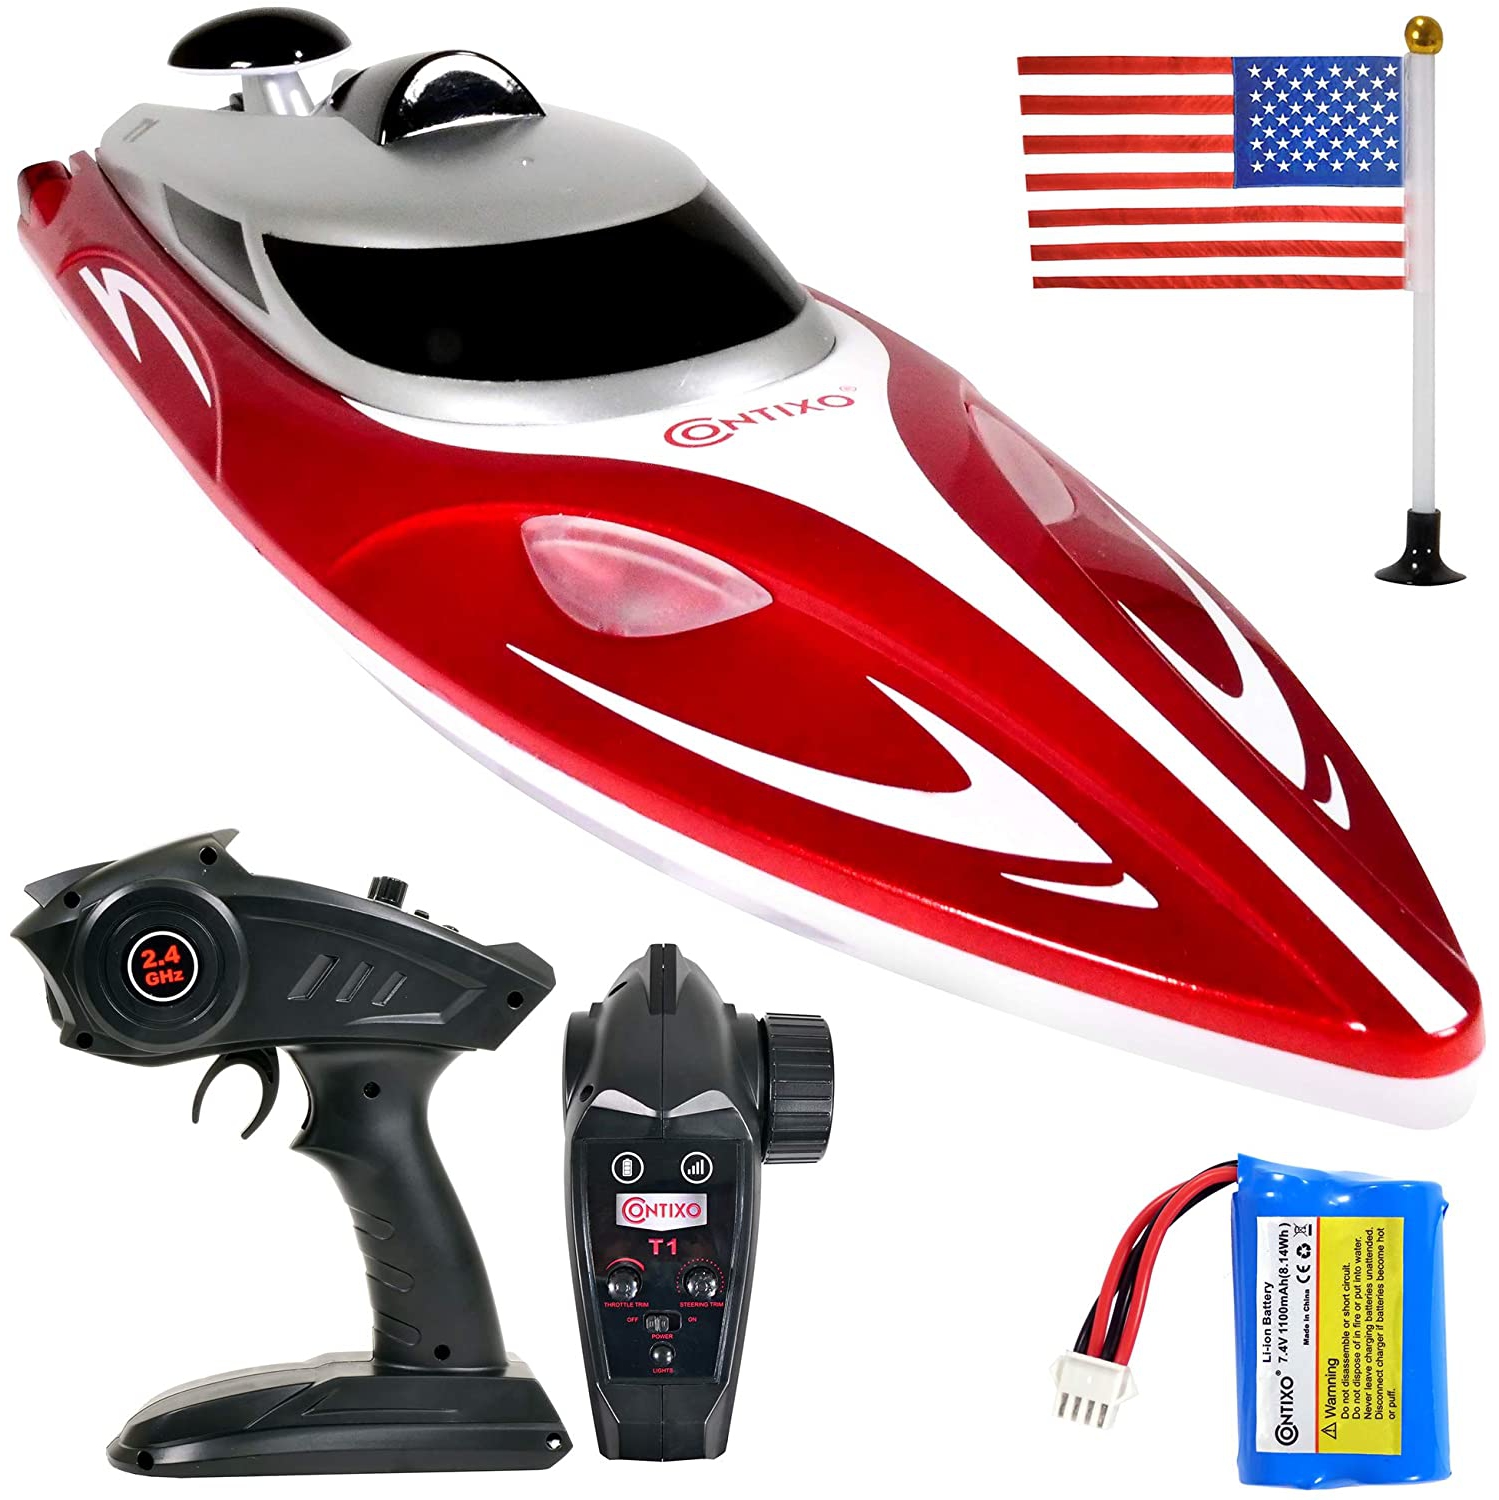 1 Battery Blue 20+ MPH High Speed Remote Control Boat for Pools and Lakes RC Speed Boats Yacht with Rechargeable Battery and USB Charging Cable 2.4Ghz RC Boat for Kids Adult 